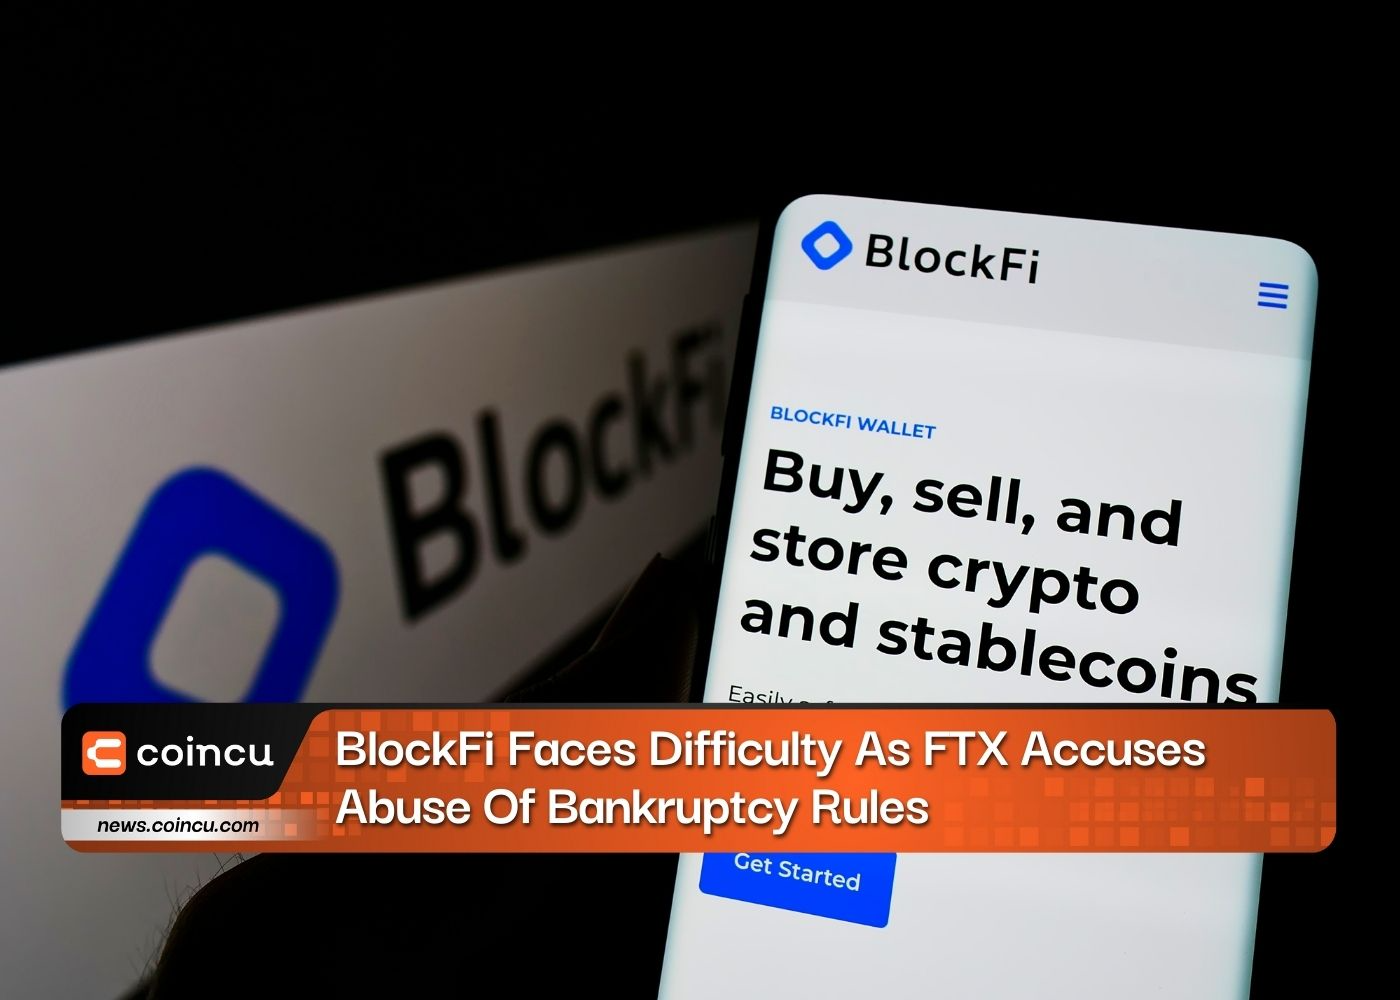 BlockFi Faces Difficulty As FTX Accuses Abuse Of Bankruptcy Rules